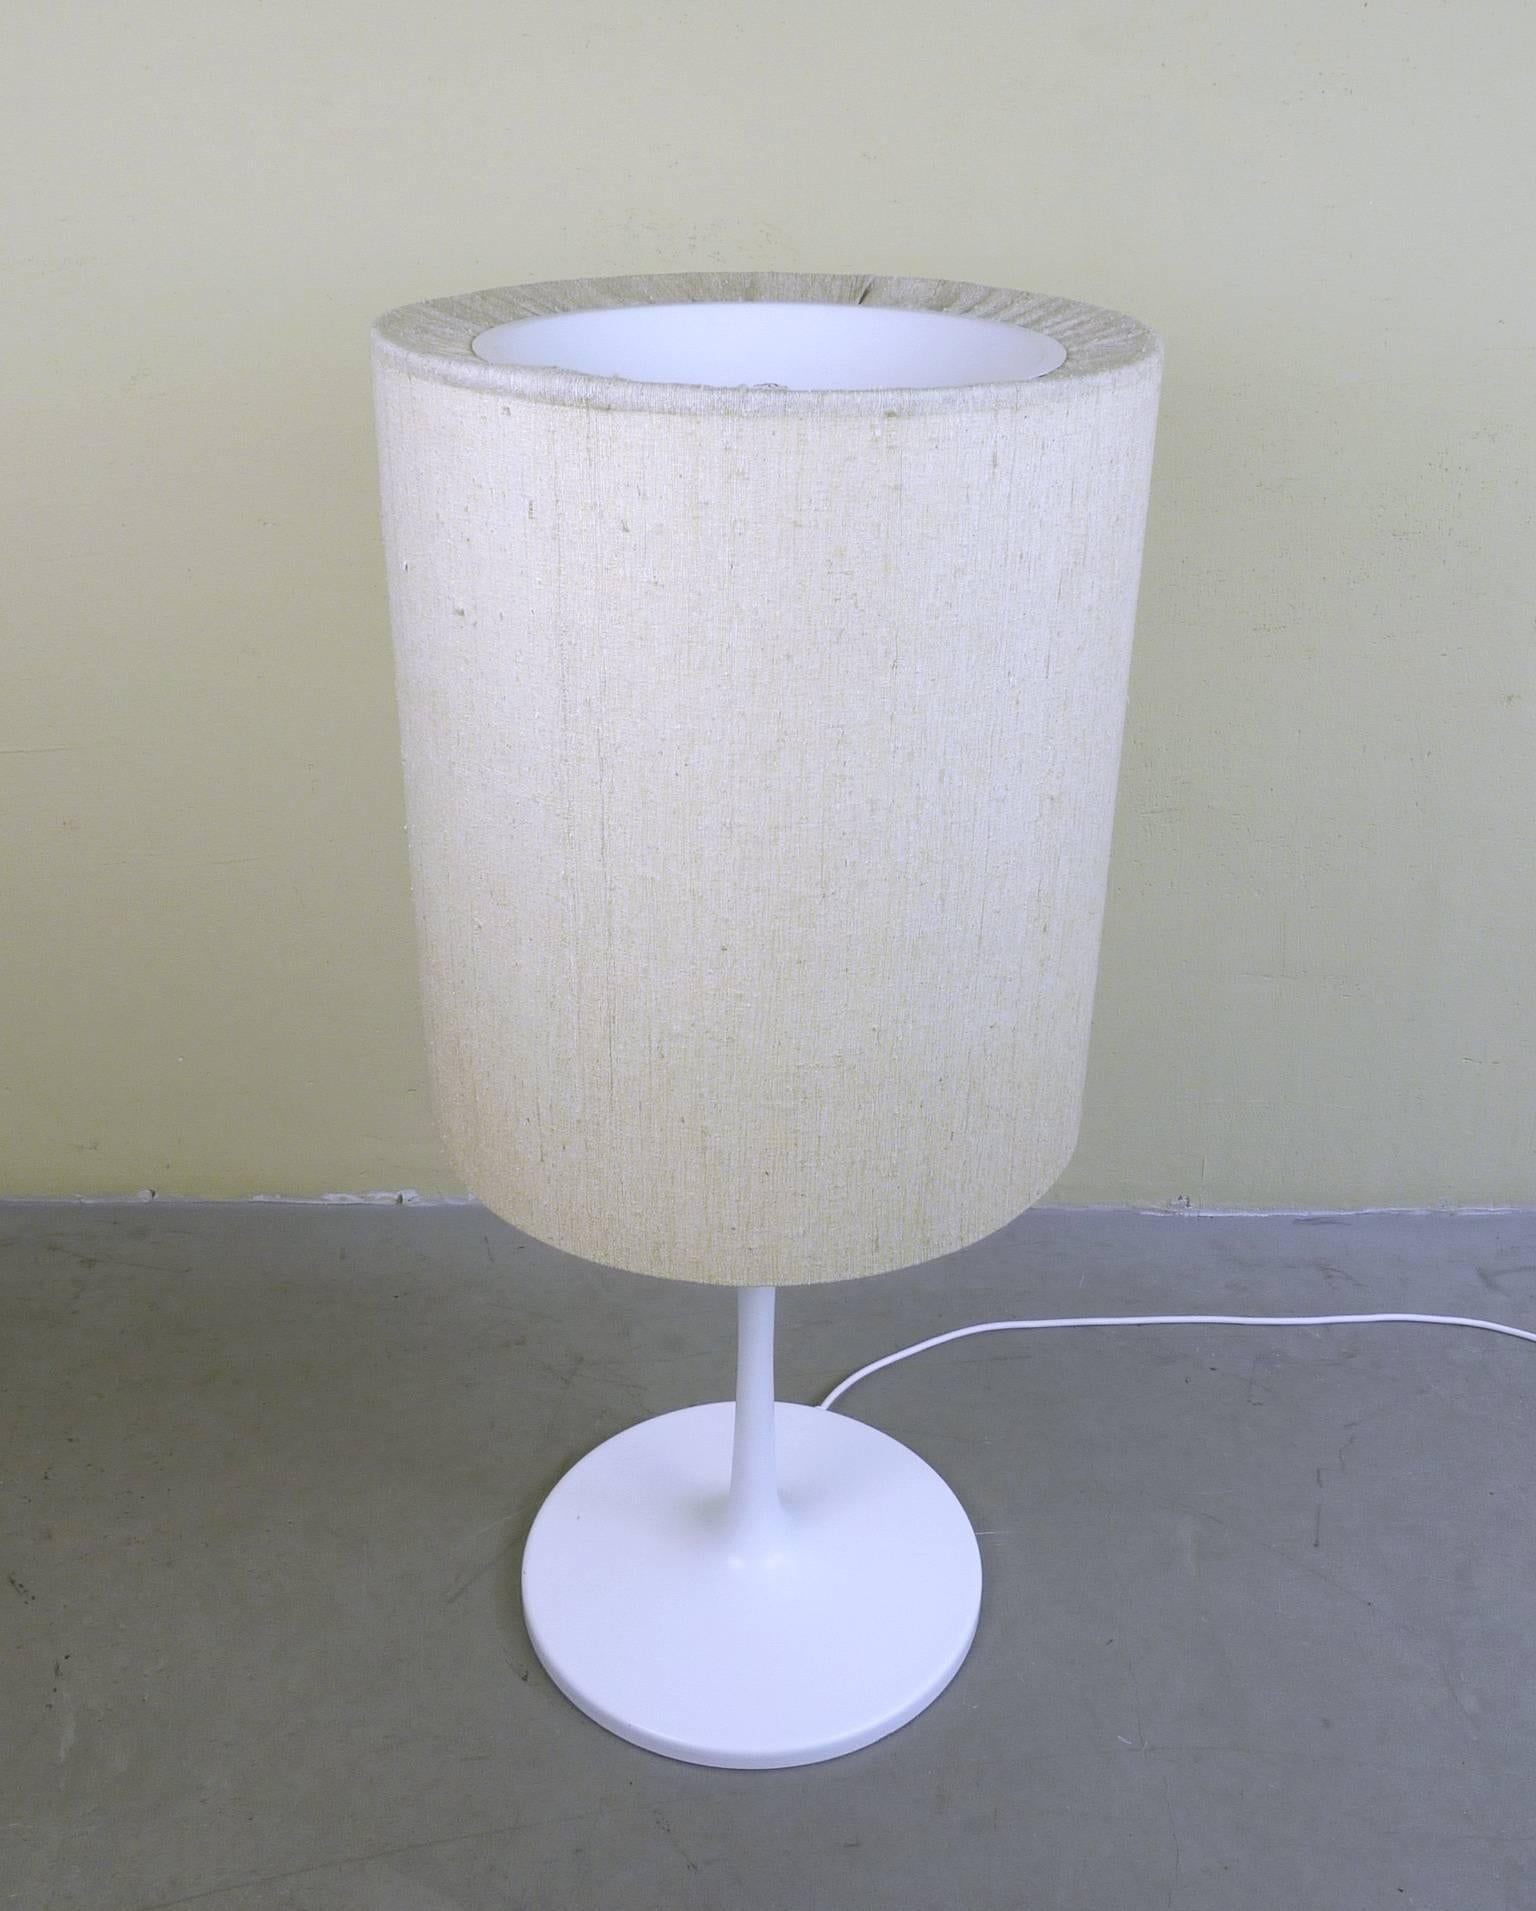 This floor lamp was made in the 1960s by German manufacturer Staff Leuchten. The white tulip base features a beige fabric shade. The lamp features four E27 sockets on the inside and a separate E27 light on top. The lamp is in very good original